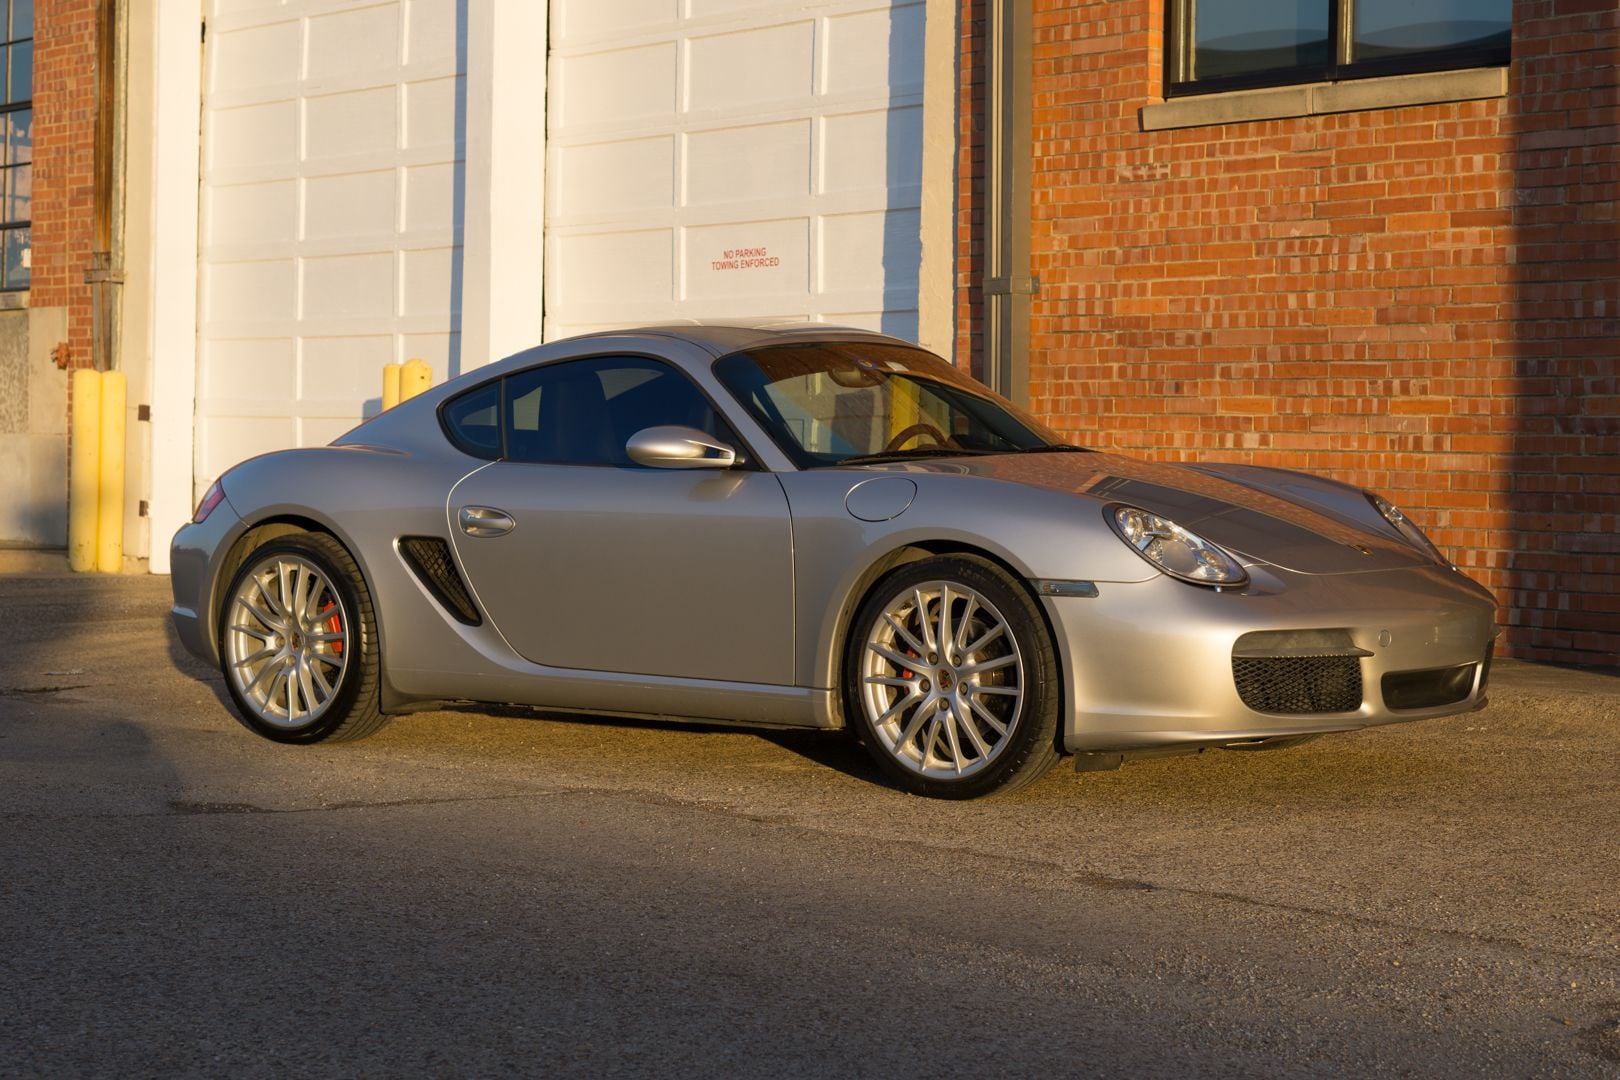 2006 Porsche Cayman - Saying Goodbye to my Porsche 987.1S Cayman S - Sport Chrono Package & Much More! - Used - VIN WP0AB298X6U782800 - 68,999 Miles - 6 cyl - 2WD - Manual - Coupe - Silver - Dallas, TX 75235, United States